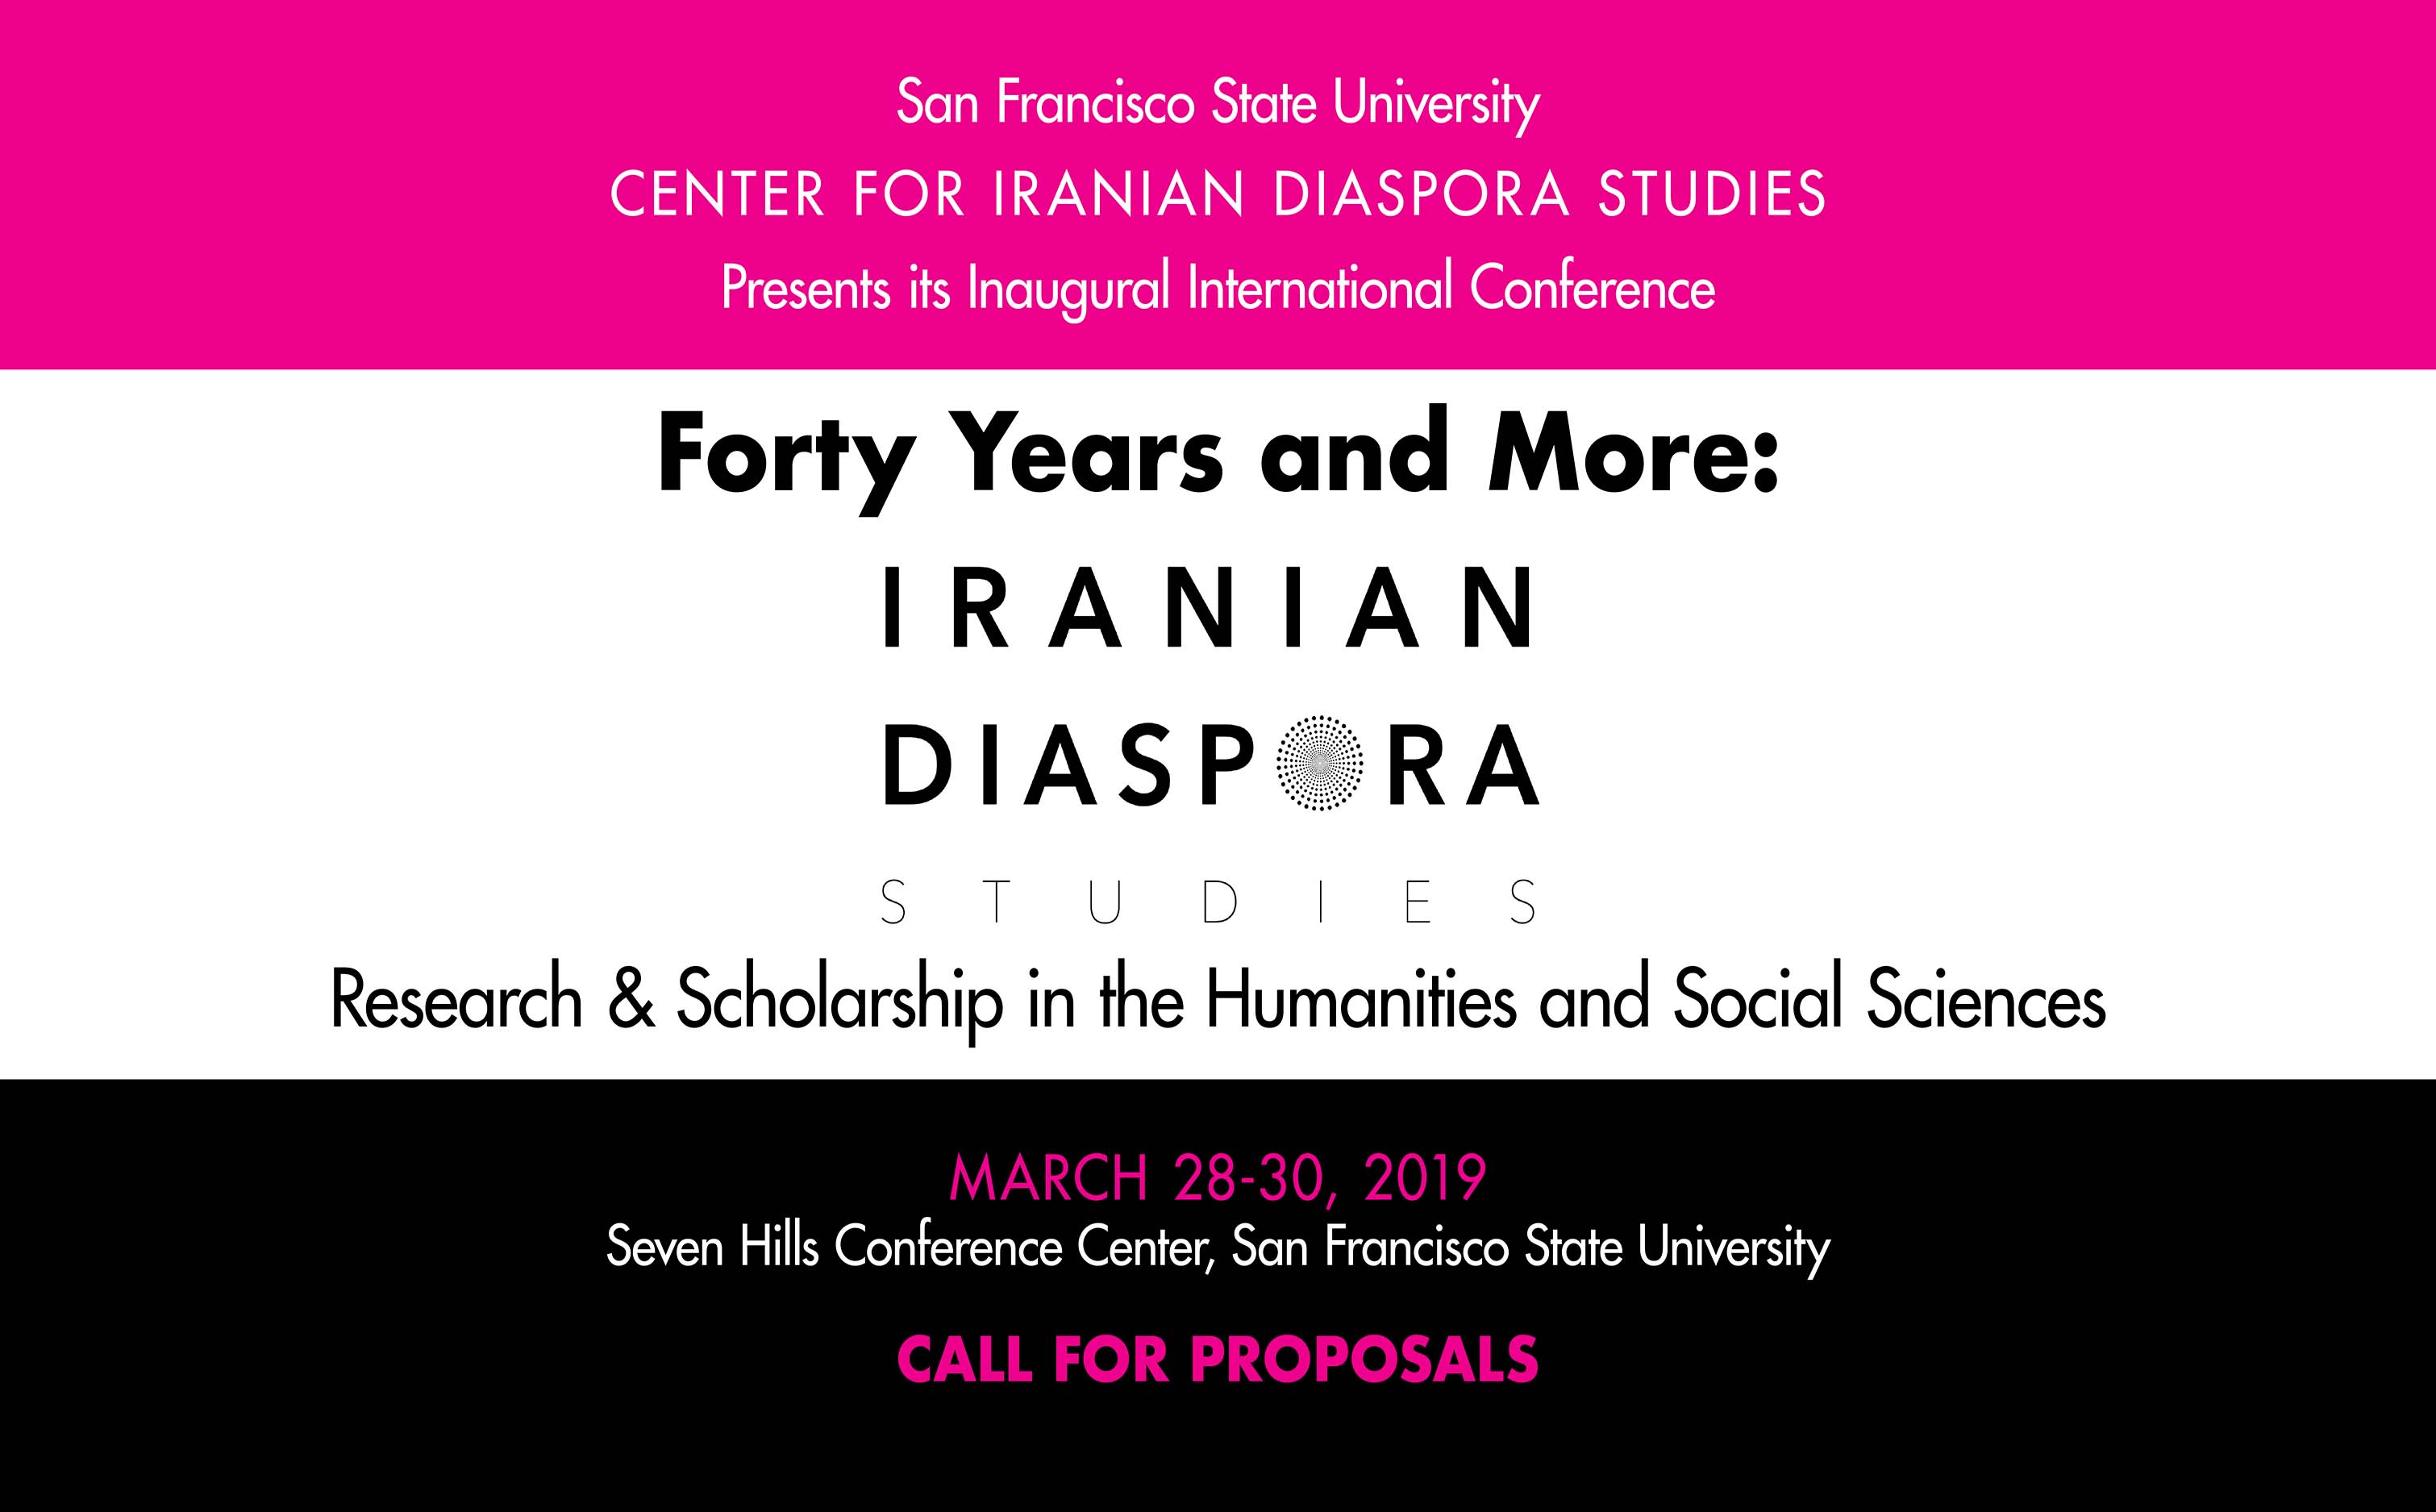 Iranian Diaspora Conference 2019 - Call for Proposals Extended to July 1